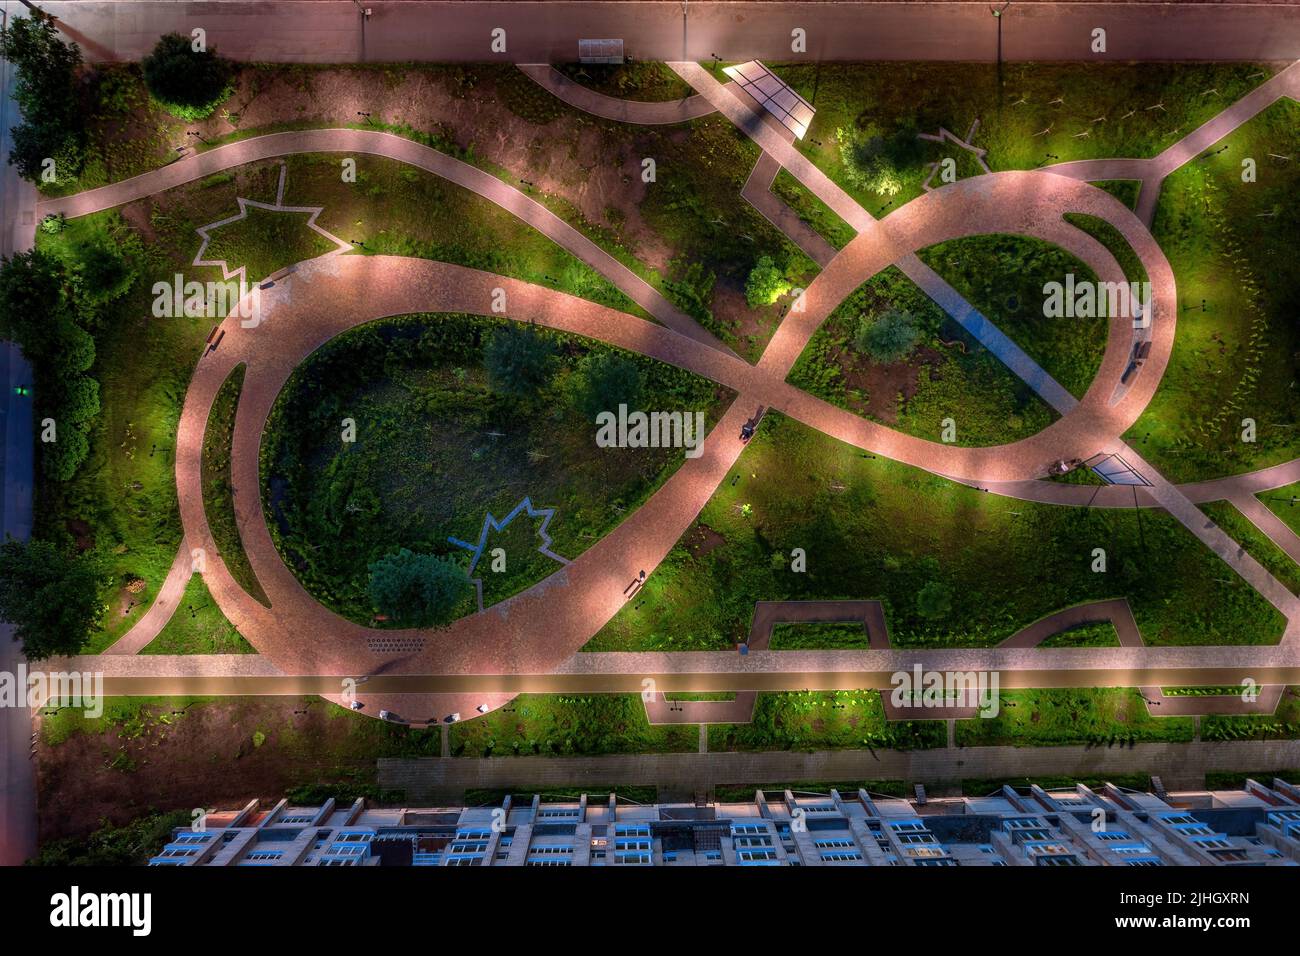 Night paved path road in the shape of a figure eight in the city courtyard at night. Top aerial view Stock Photo